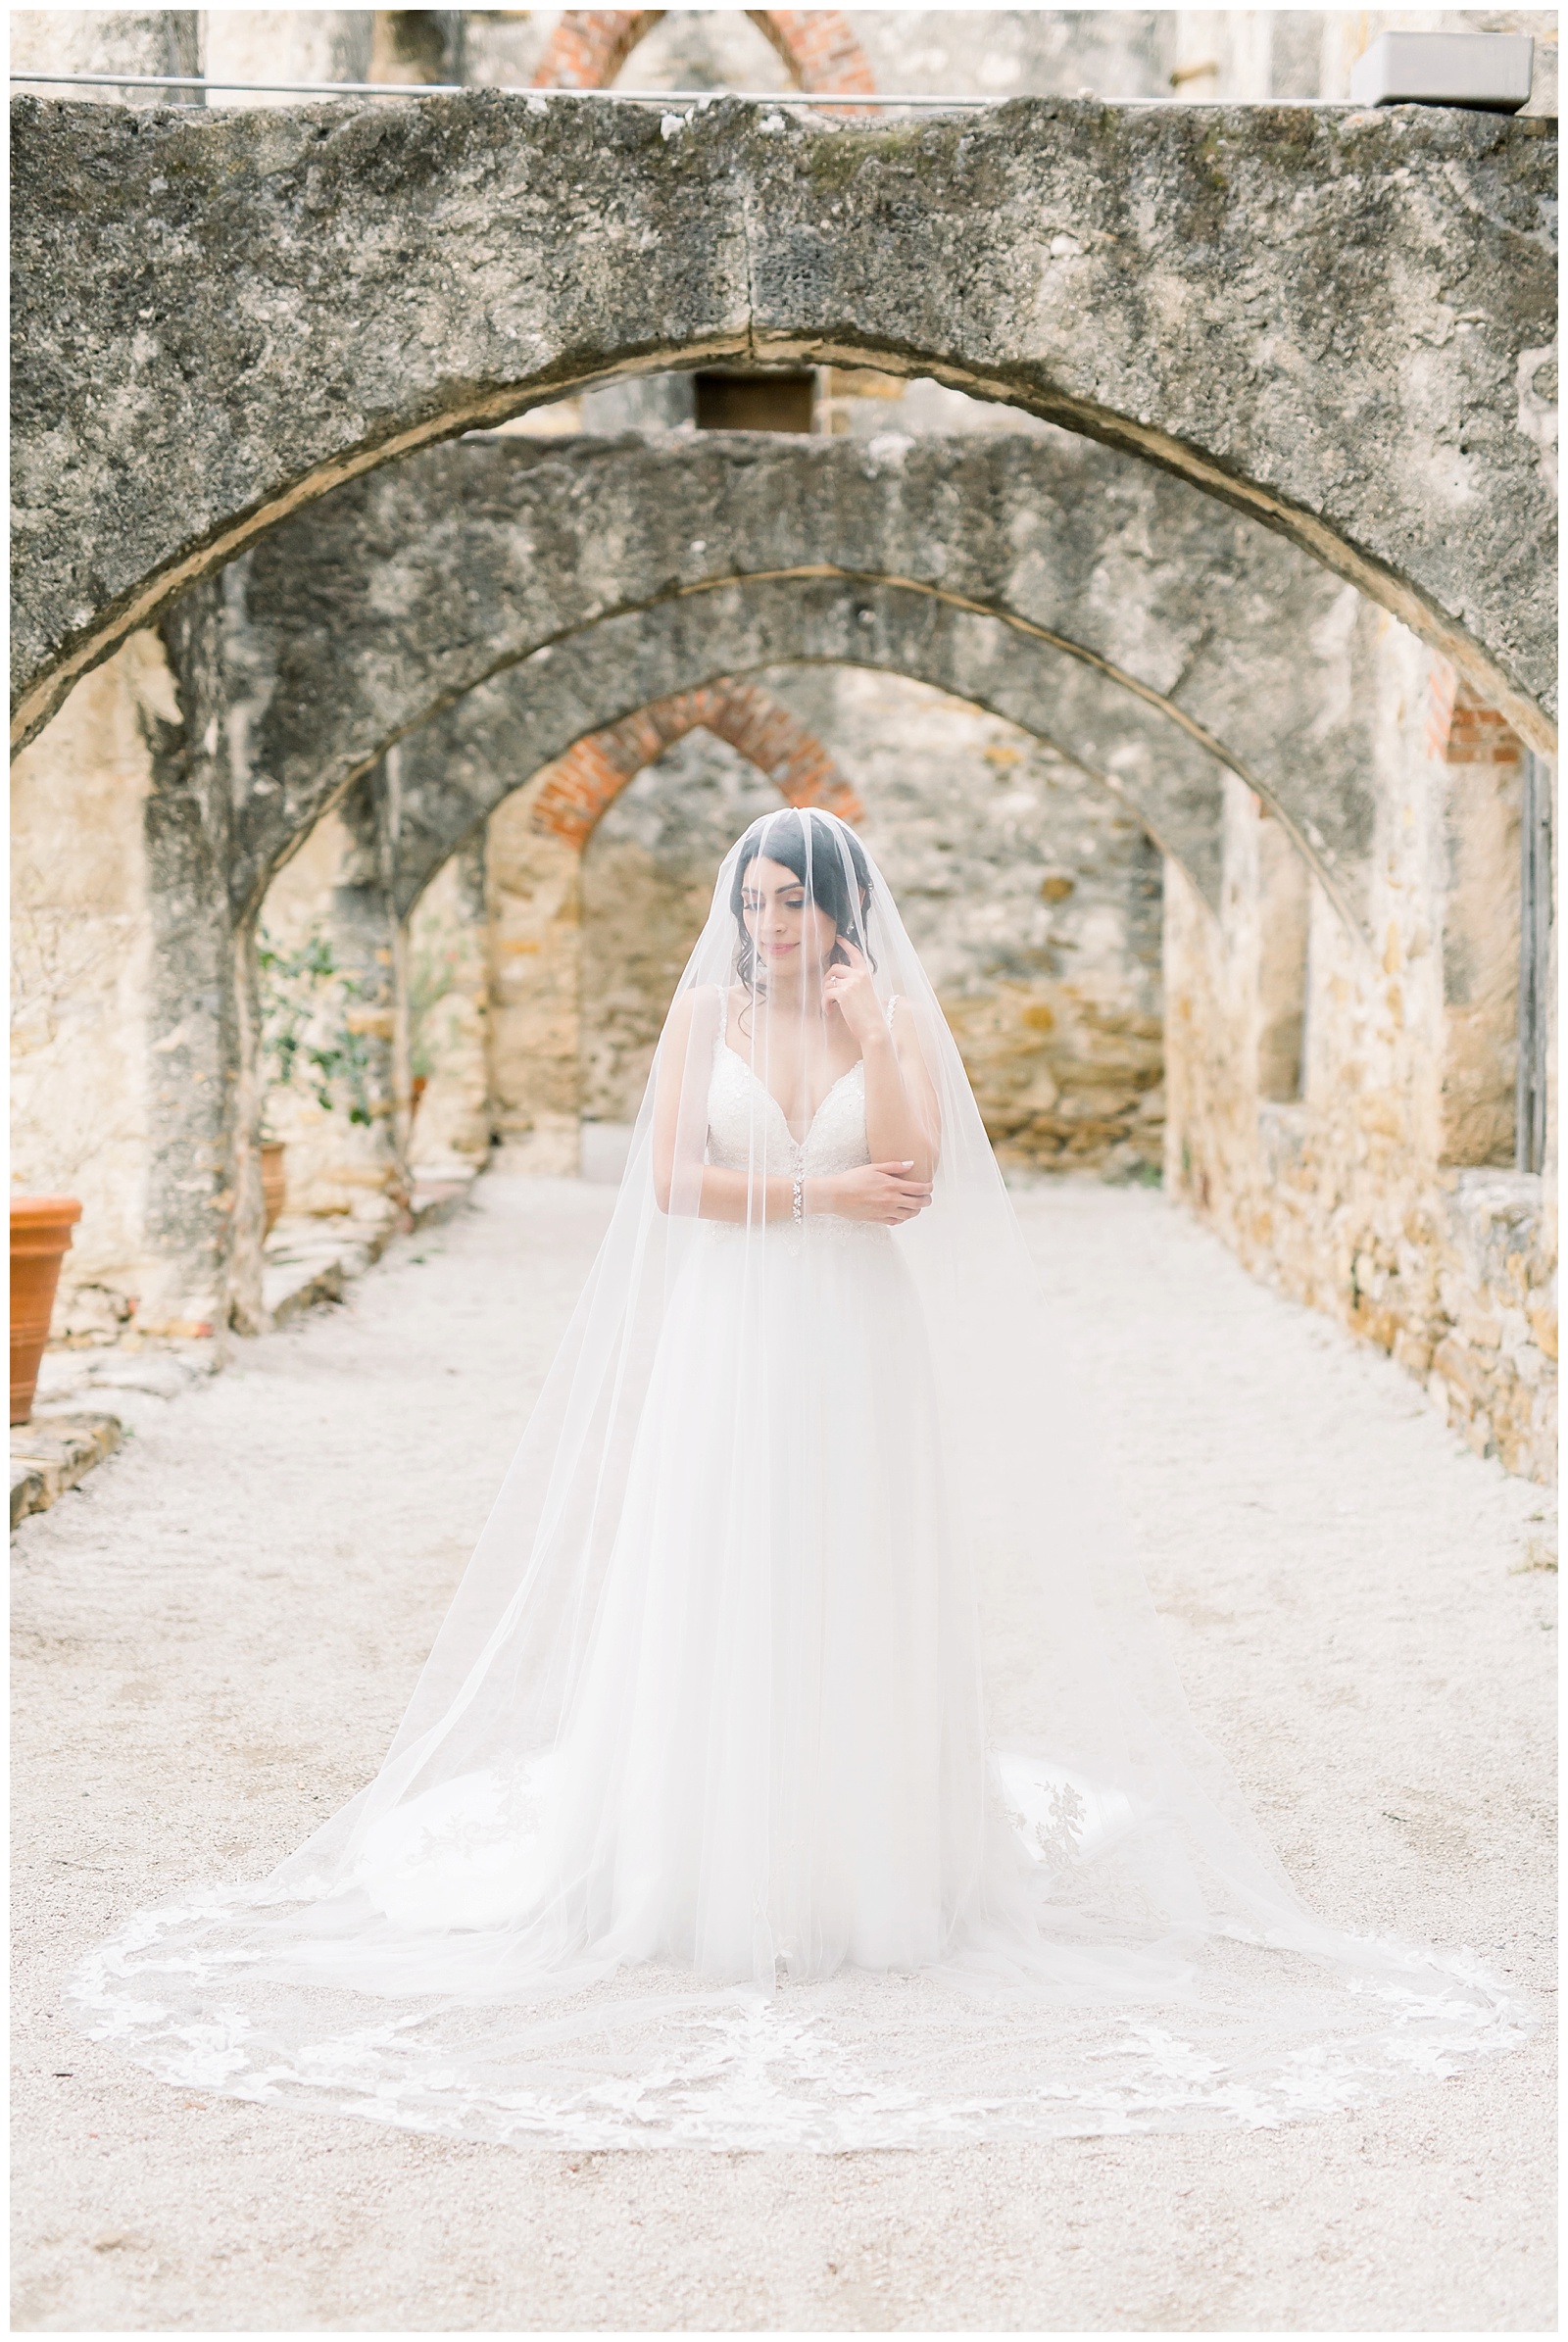 Gorgeous bride with romantic wedding dress for her Spanish Missions Bridal Portraits in San Antonio, TX with Monica Roberts Photography | www.monicaroberts.com